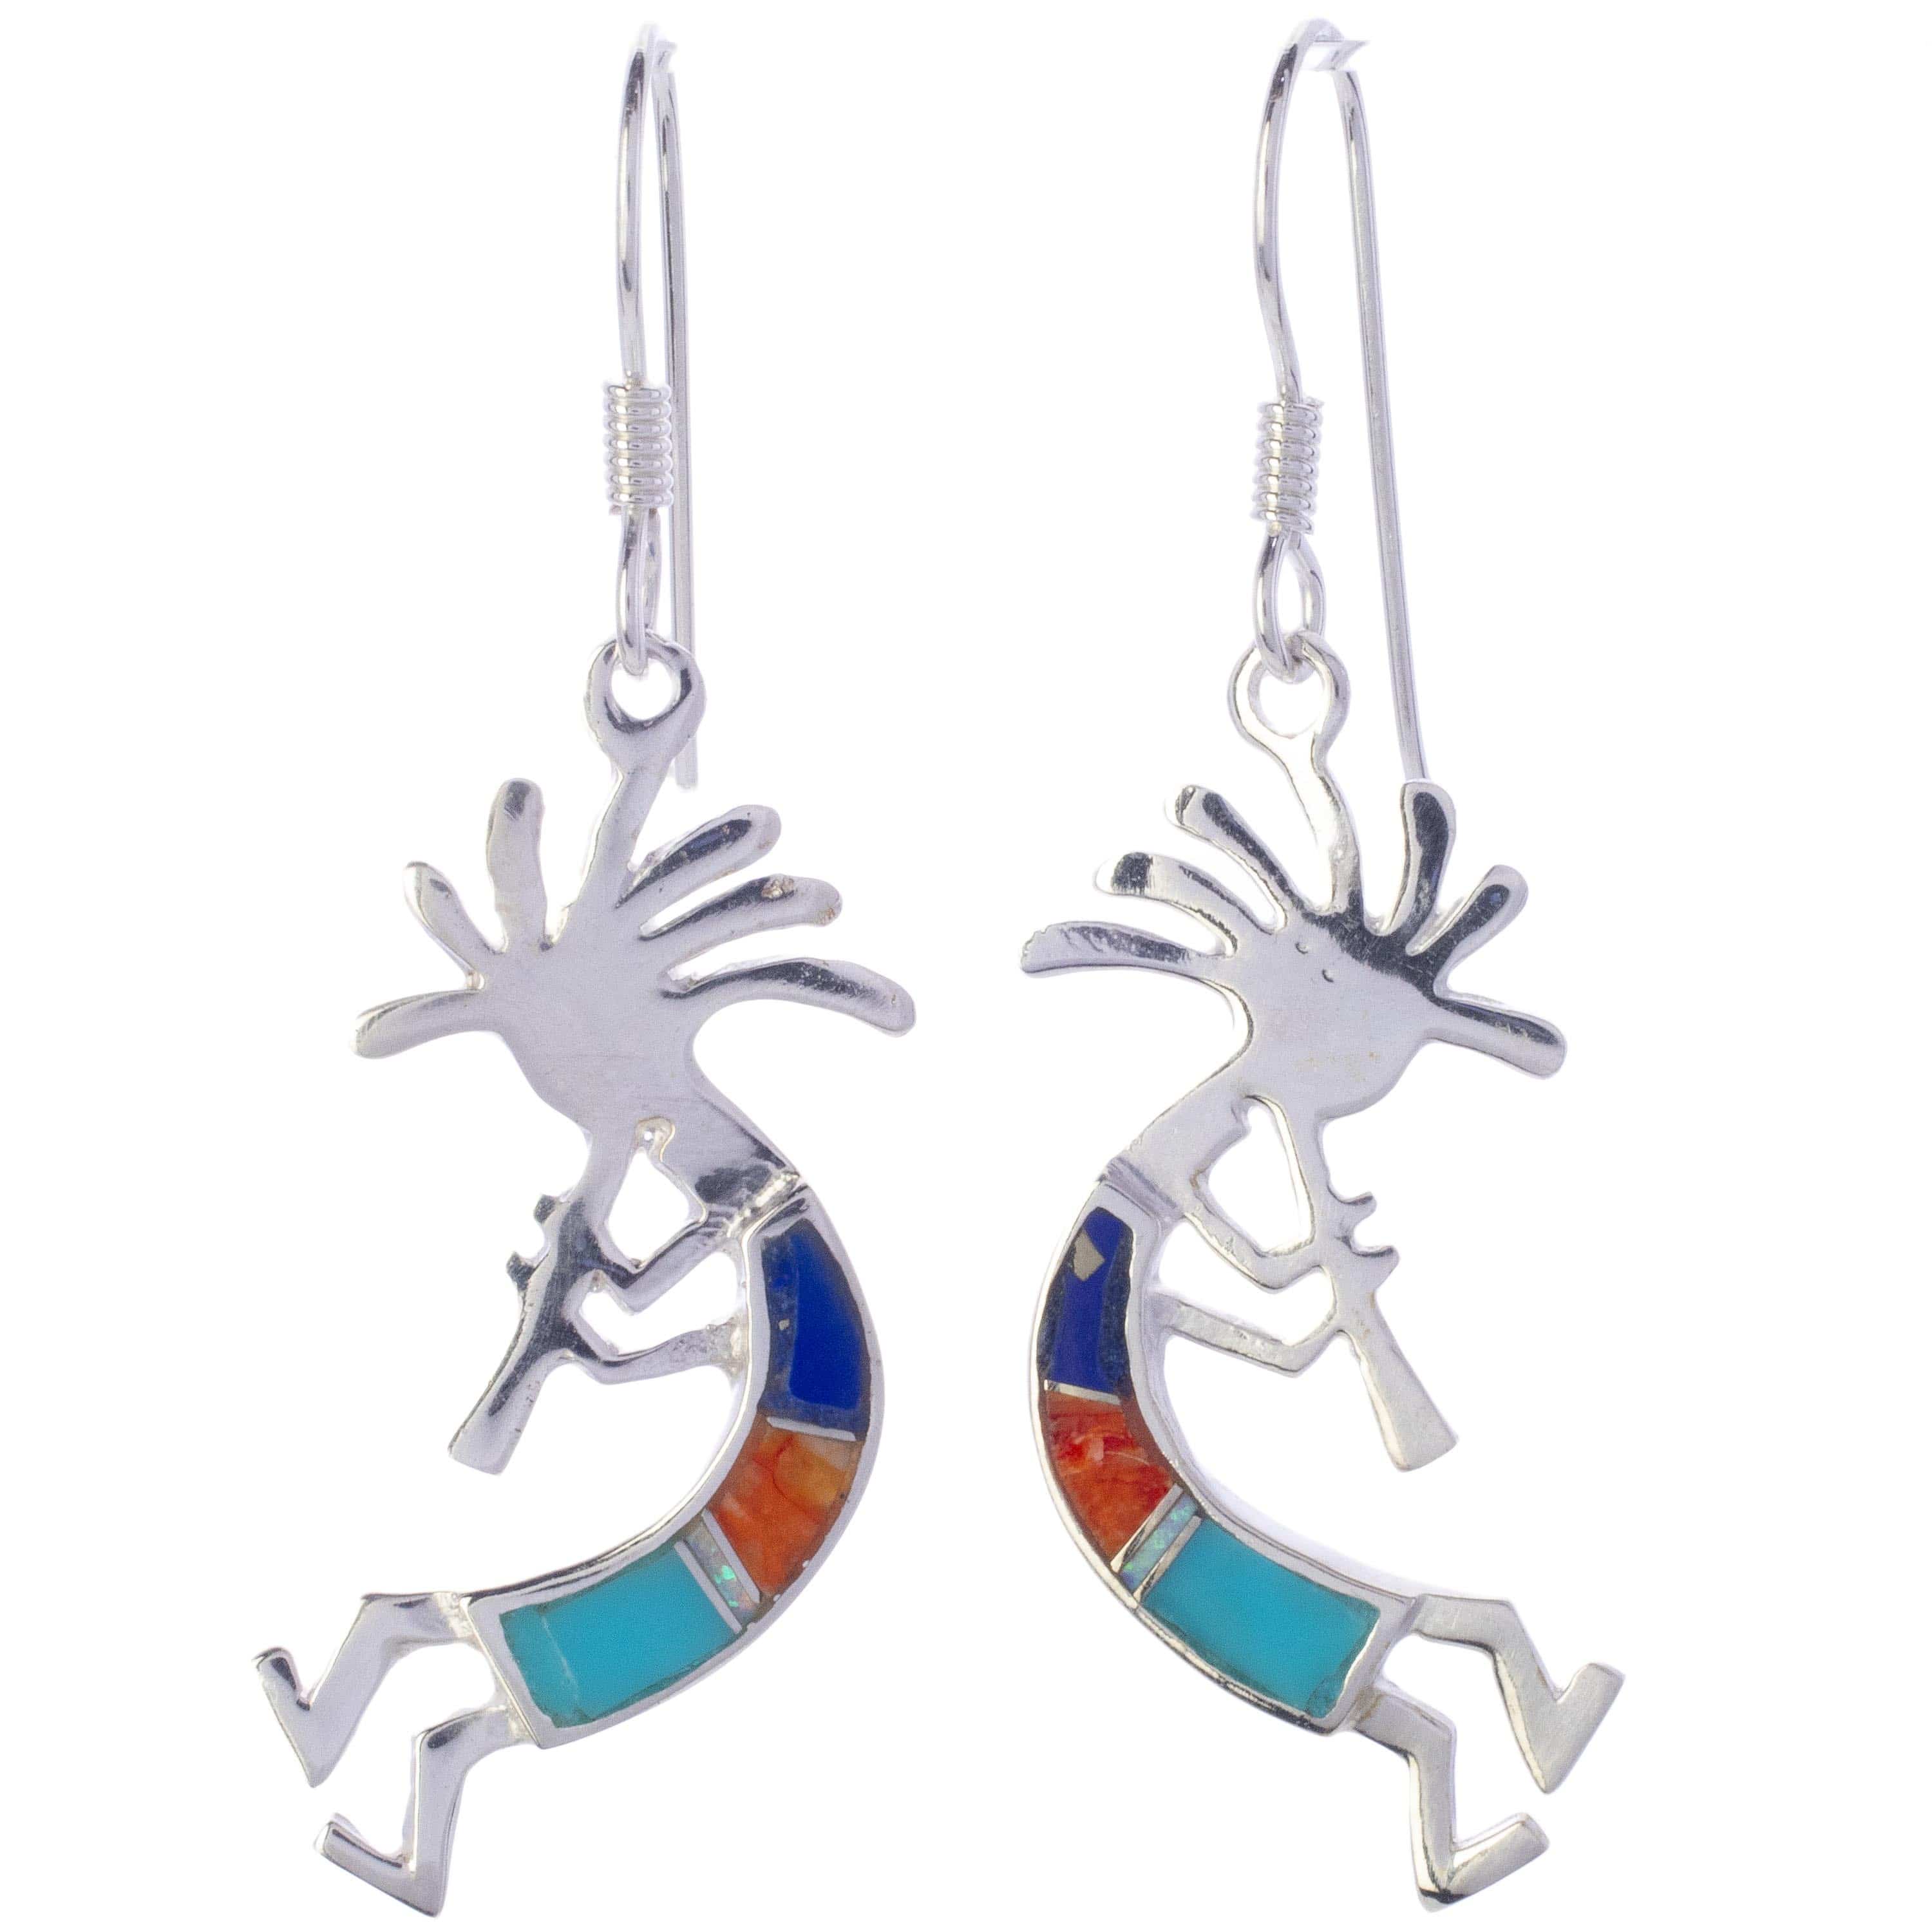 KALIFANO Southwest Silver Jewelry Multi Gemstone Kokopelli Sterling Silver Earrings with French Hook USA Handmade with Opal Accent NME.2150.MT